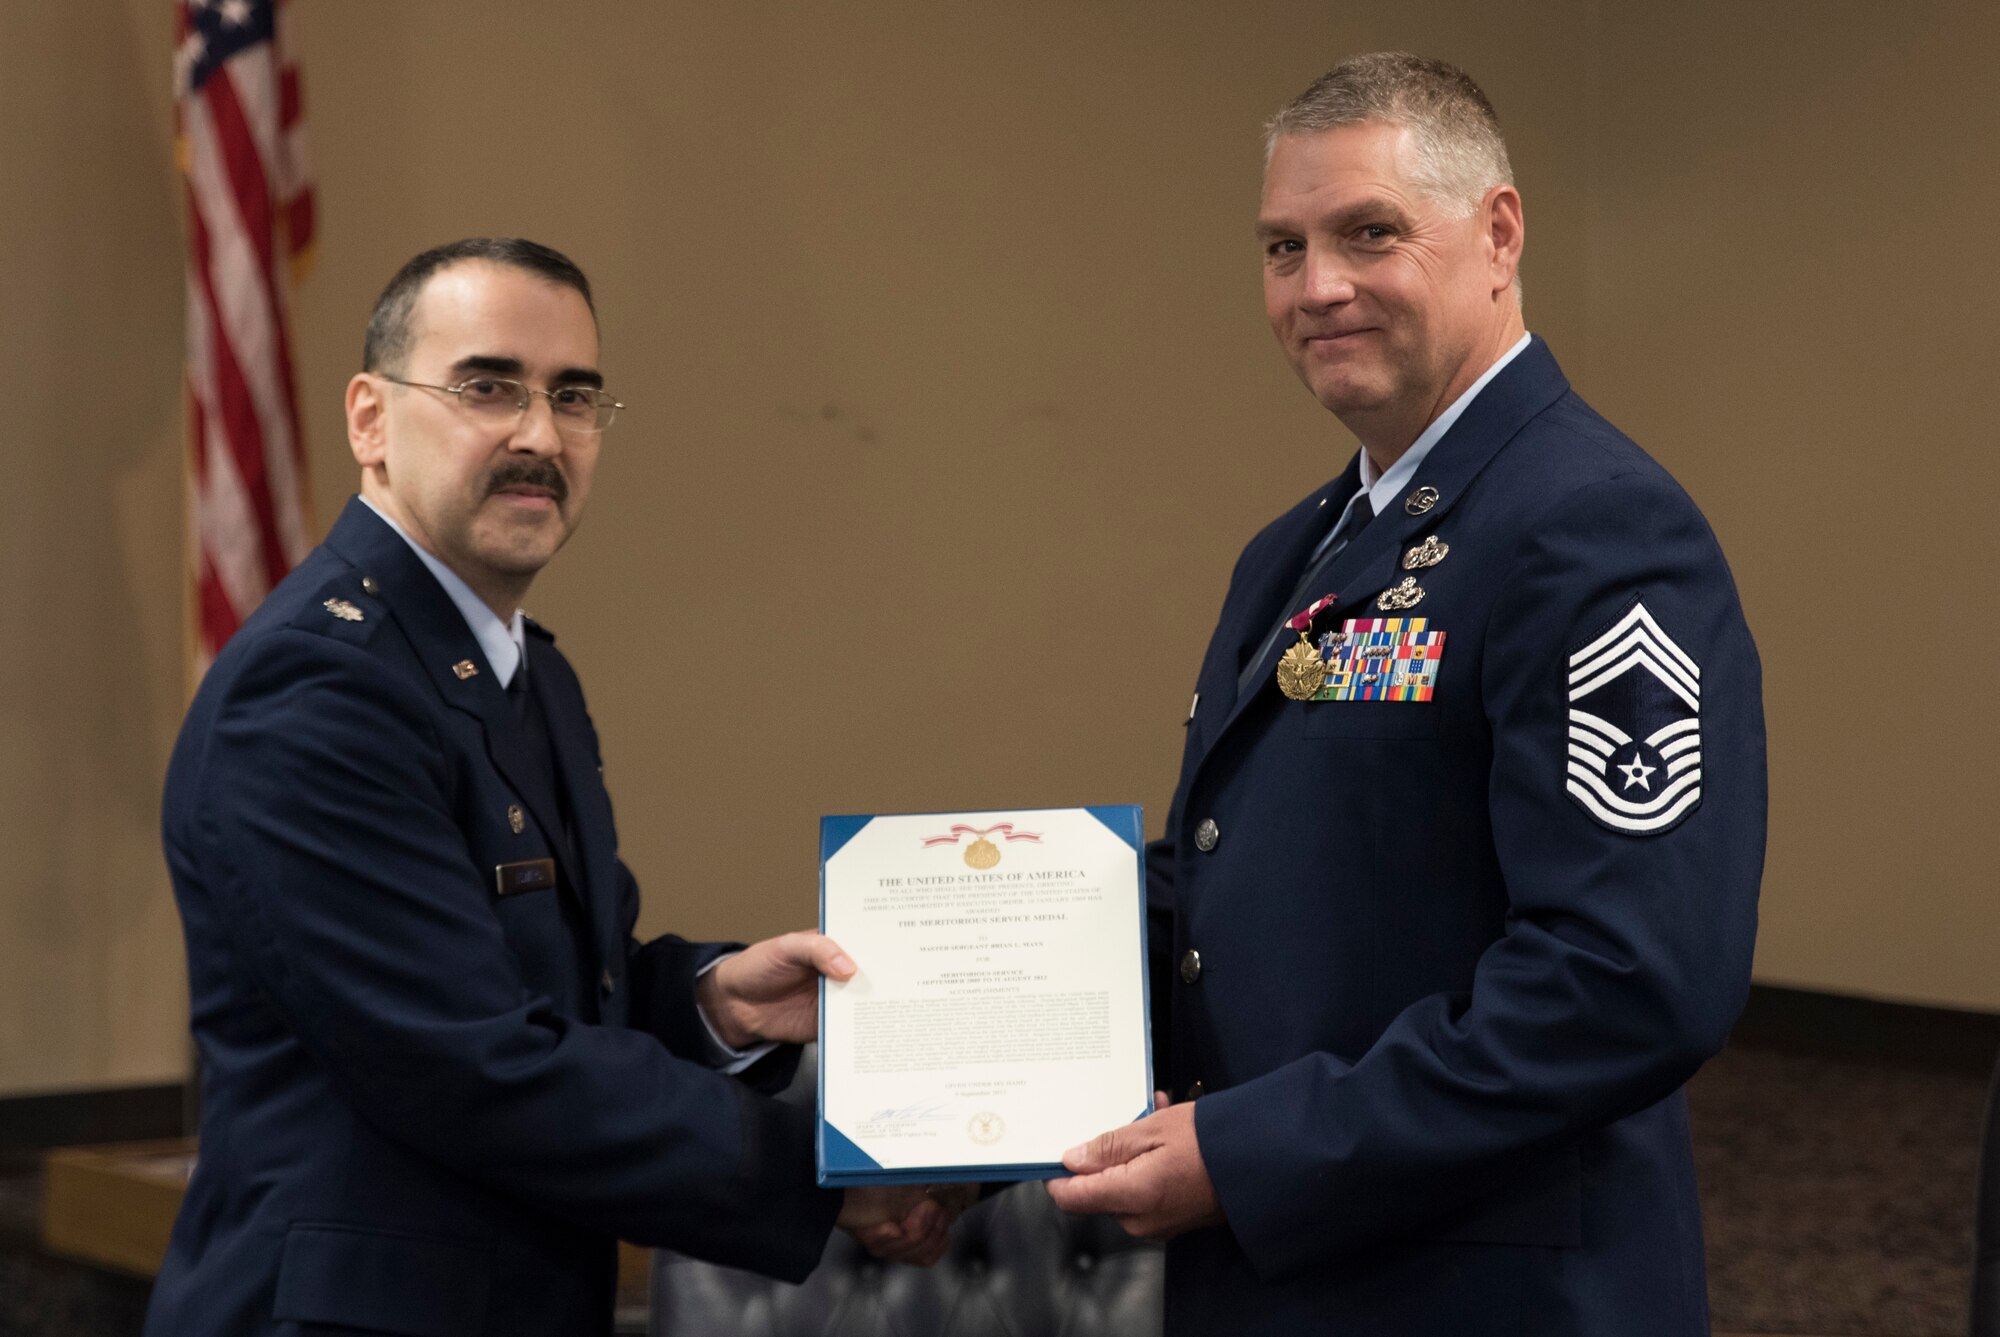 Lt. Col Micheal D. Howard, 188th Civil Engineering Commander, presents Cheif Master Sgt. Ronald W. Redding,188th Civil Engineering Squadron Emergency Management Chief, with the Meritorious Service Medal during Cheif Redding's retirement ceremony at Fort Smith, AR., Apr. 07, 2018. (U.S. Air National Guard photo by Tech. Sgt. Daniel Condit)